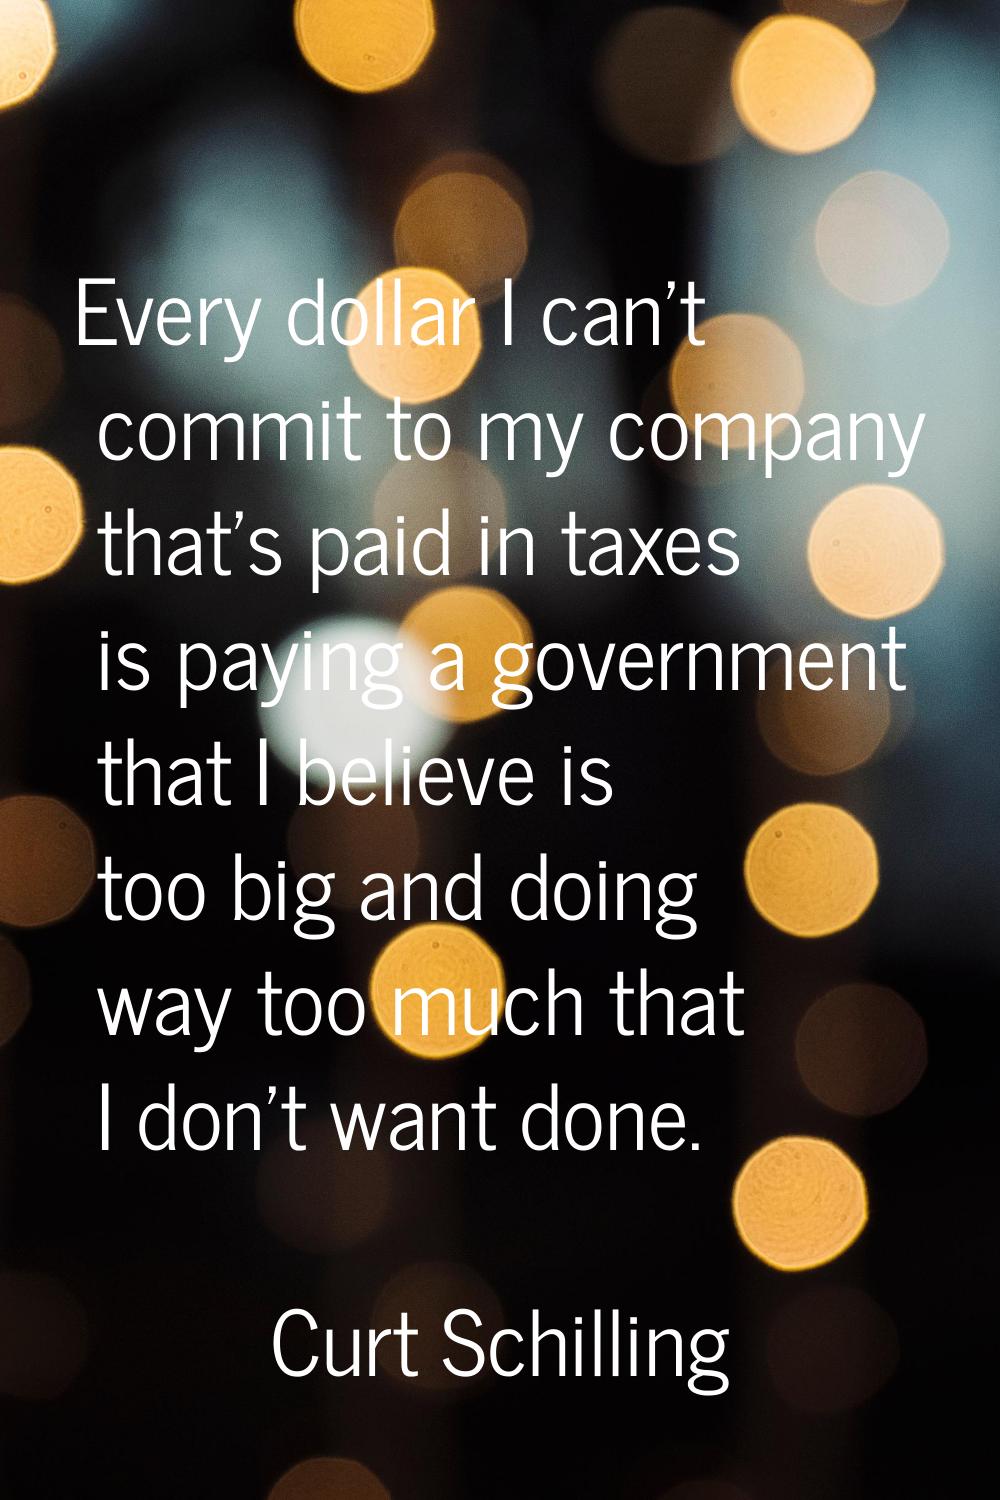 Every dollar I can't commit to my company that's paid in taxes is paying a government that I believ